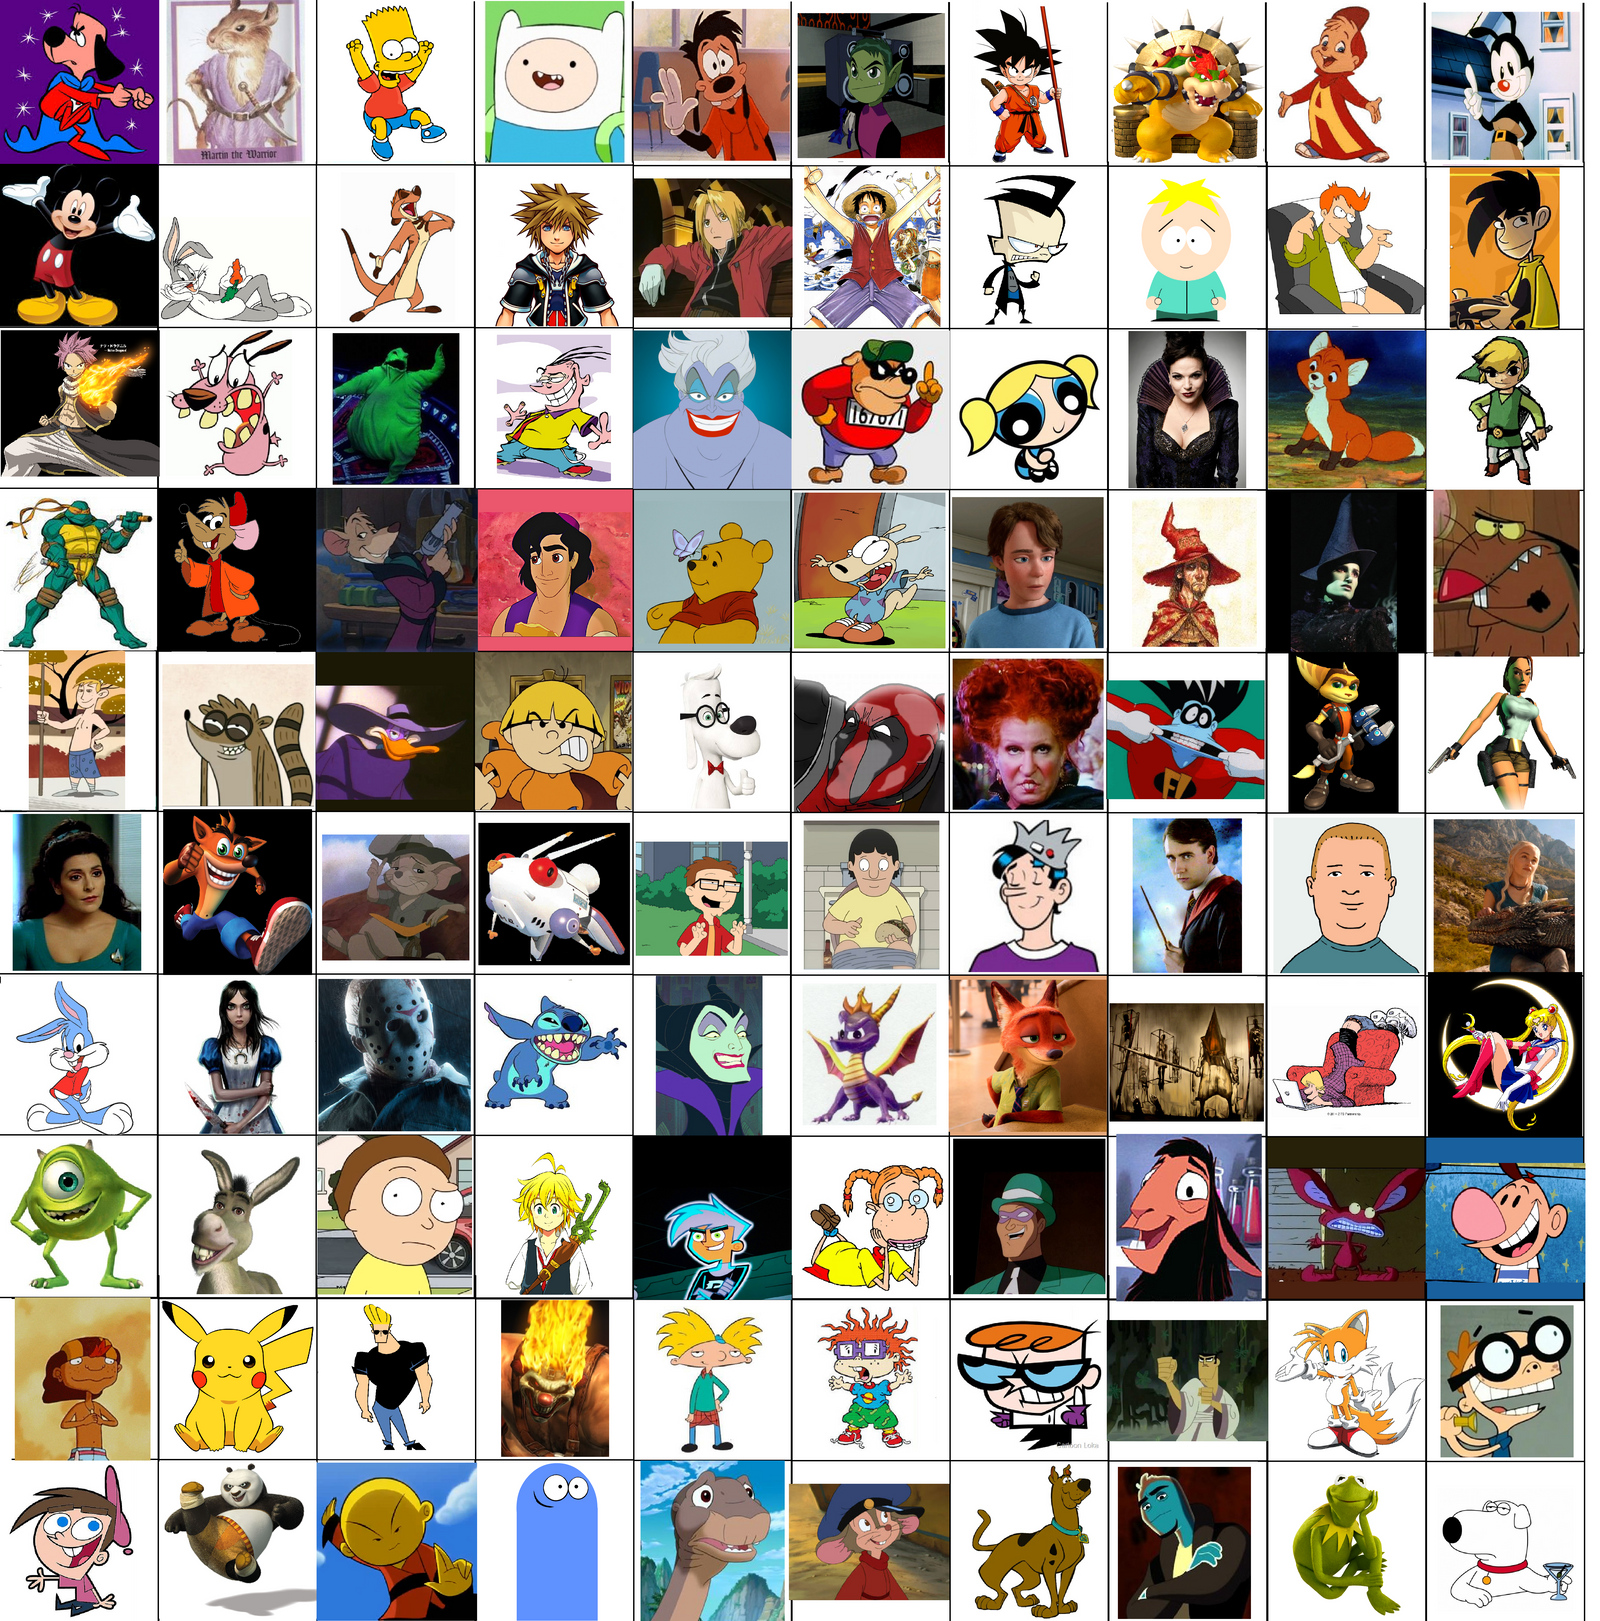 100 Favorite Fictional Characters by Jake-the-Underdog on DeviantArt